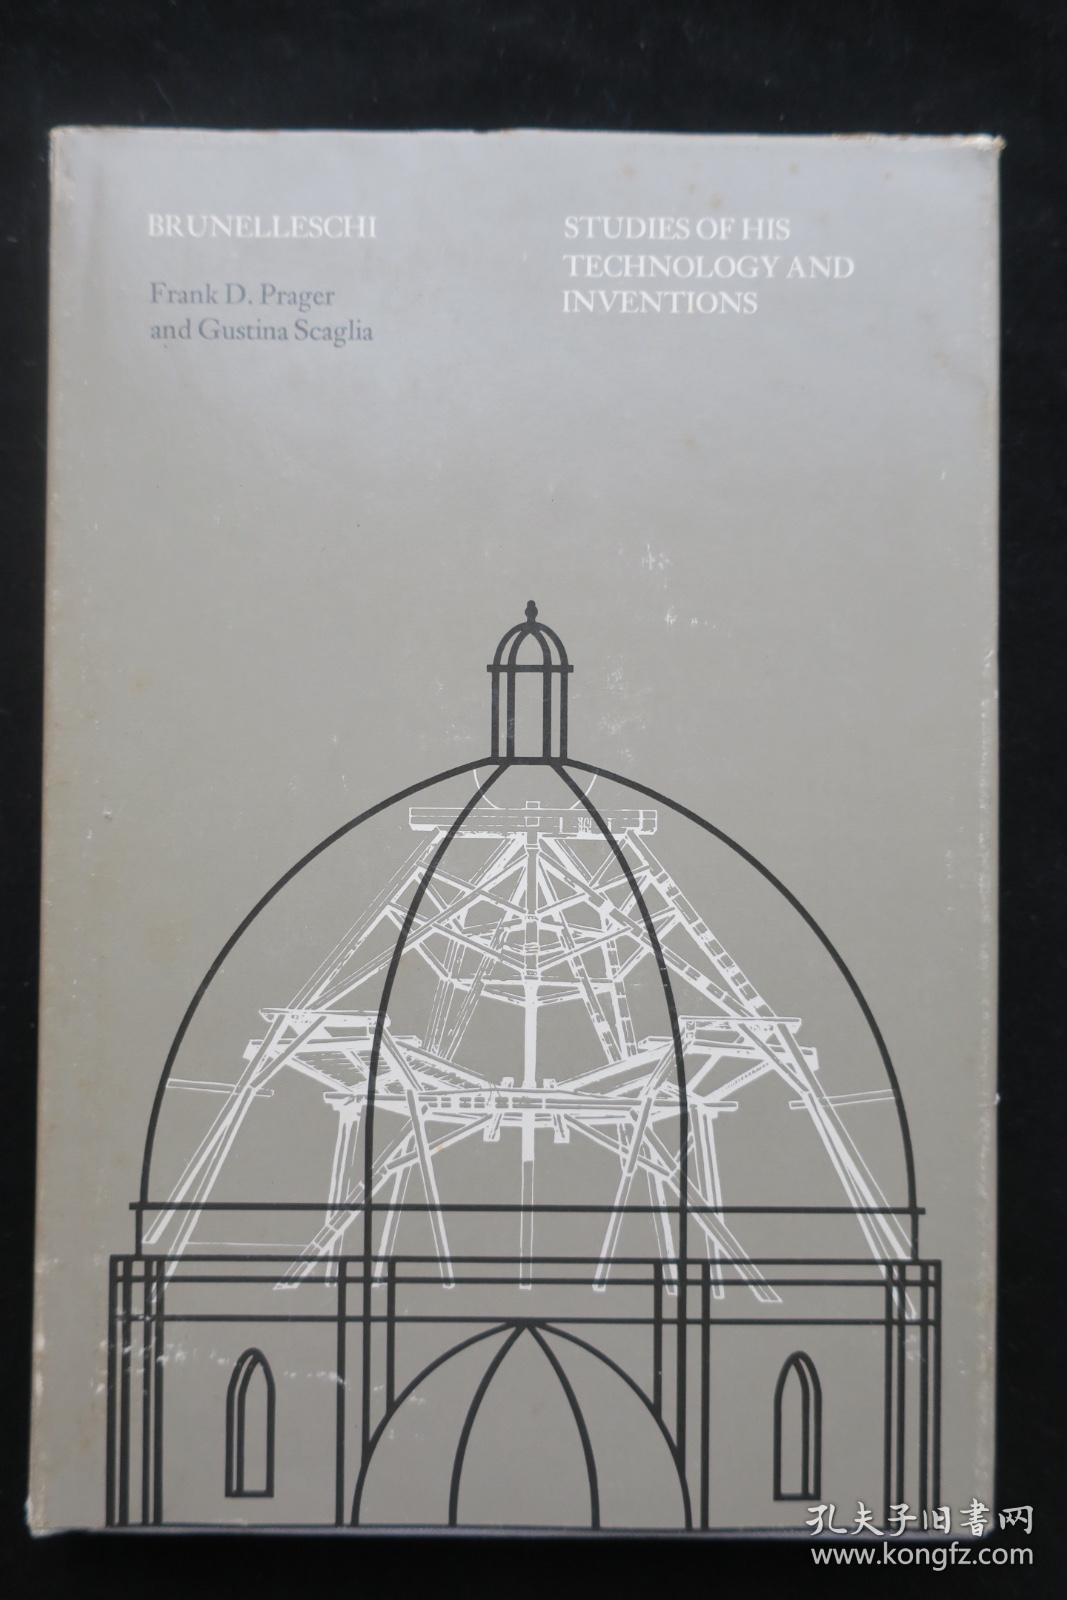 Studies of His Technology and Inventions Brunelleschi